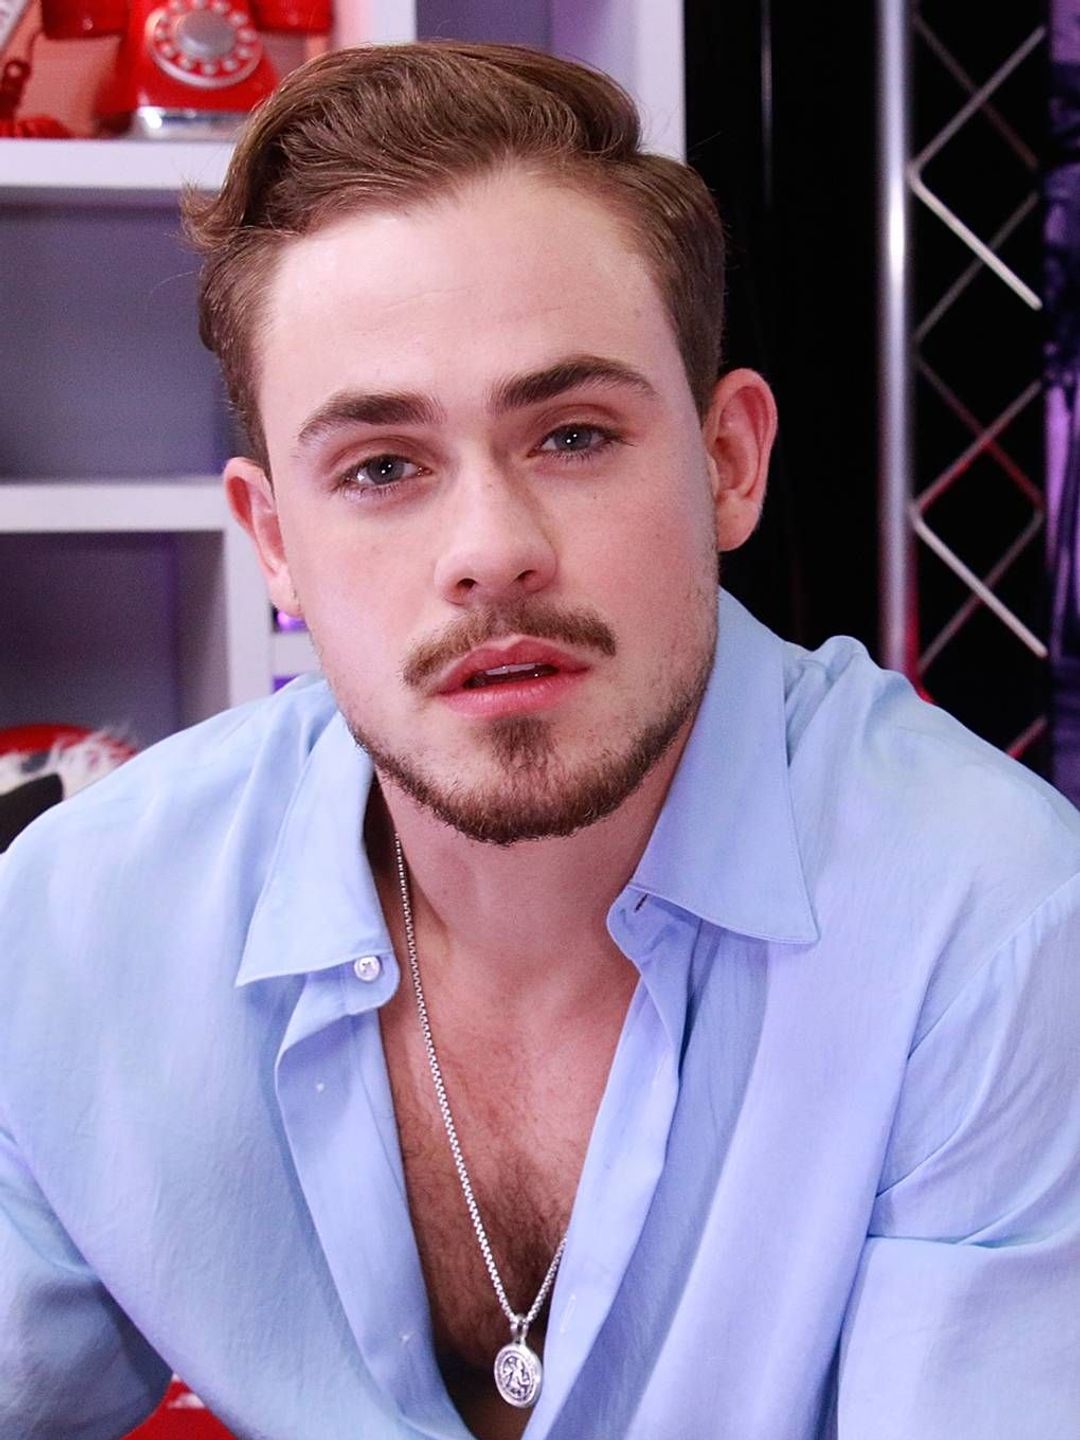 Dacre Montgomery who is his mother